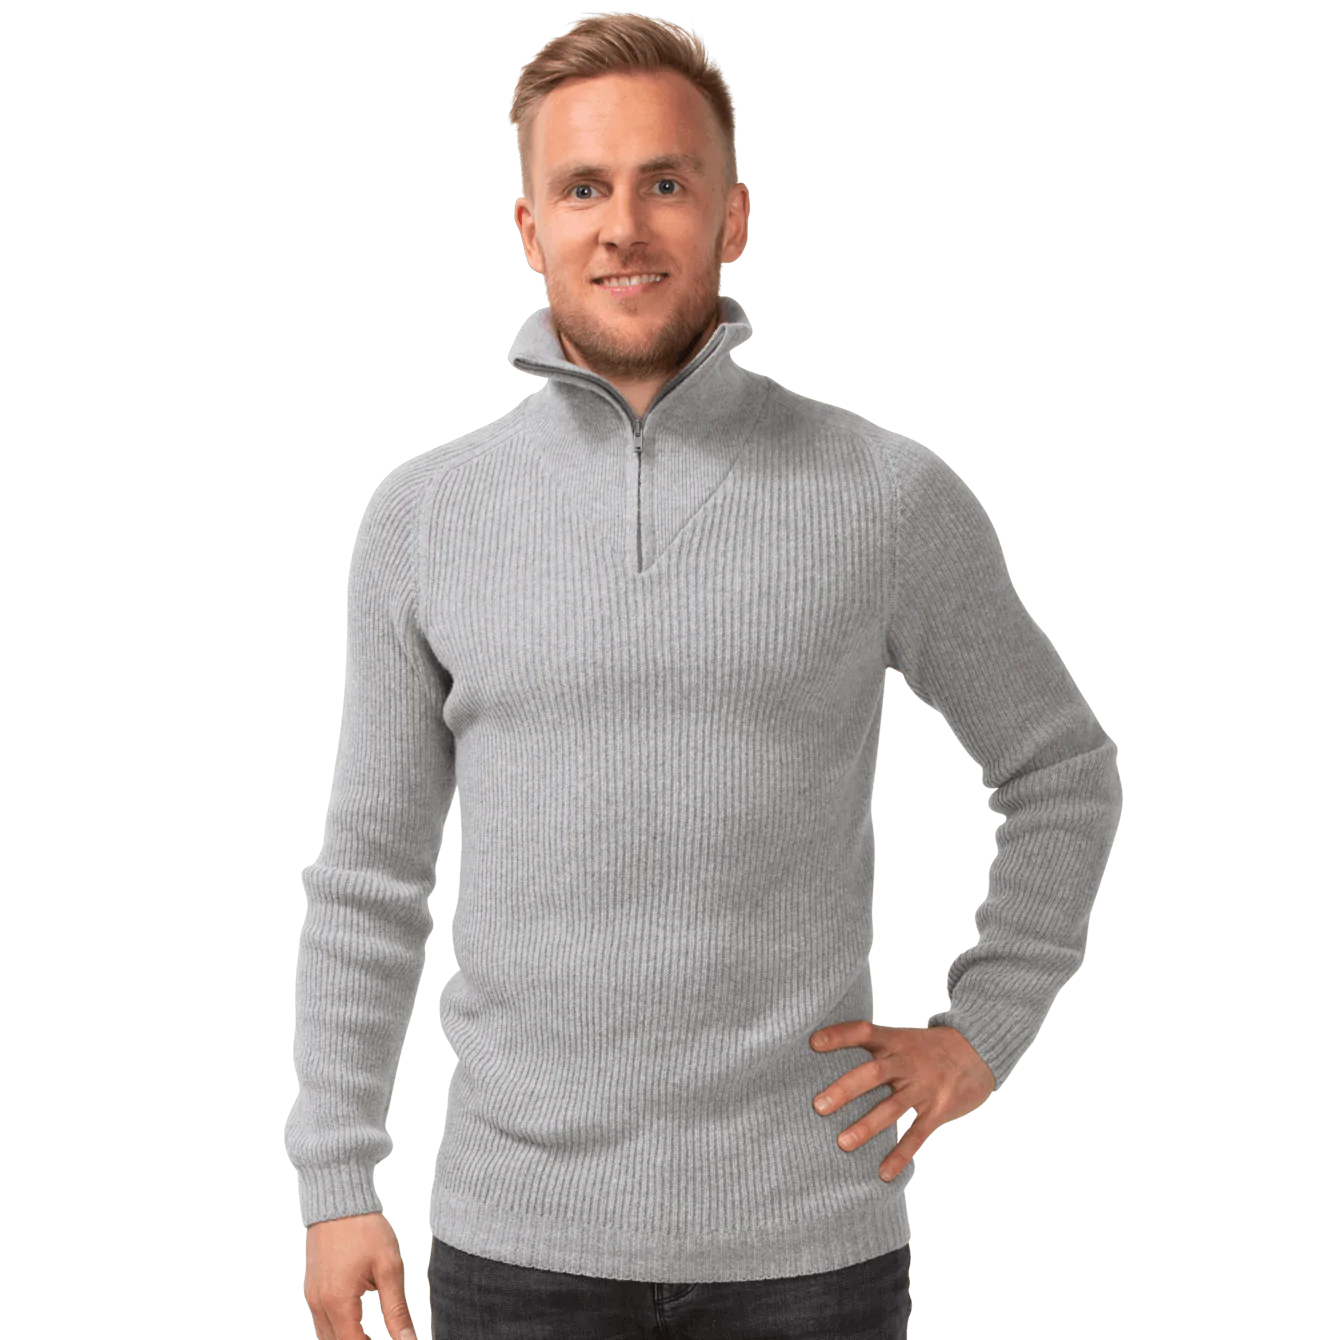 north-outdoor-madeinfinland-metso-m-pullover-light-grey-pose-front-fw19-n11703g04-crop_1800x1800